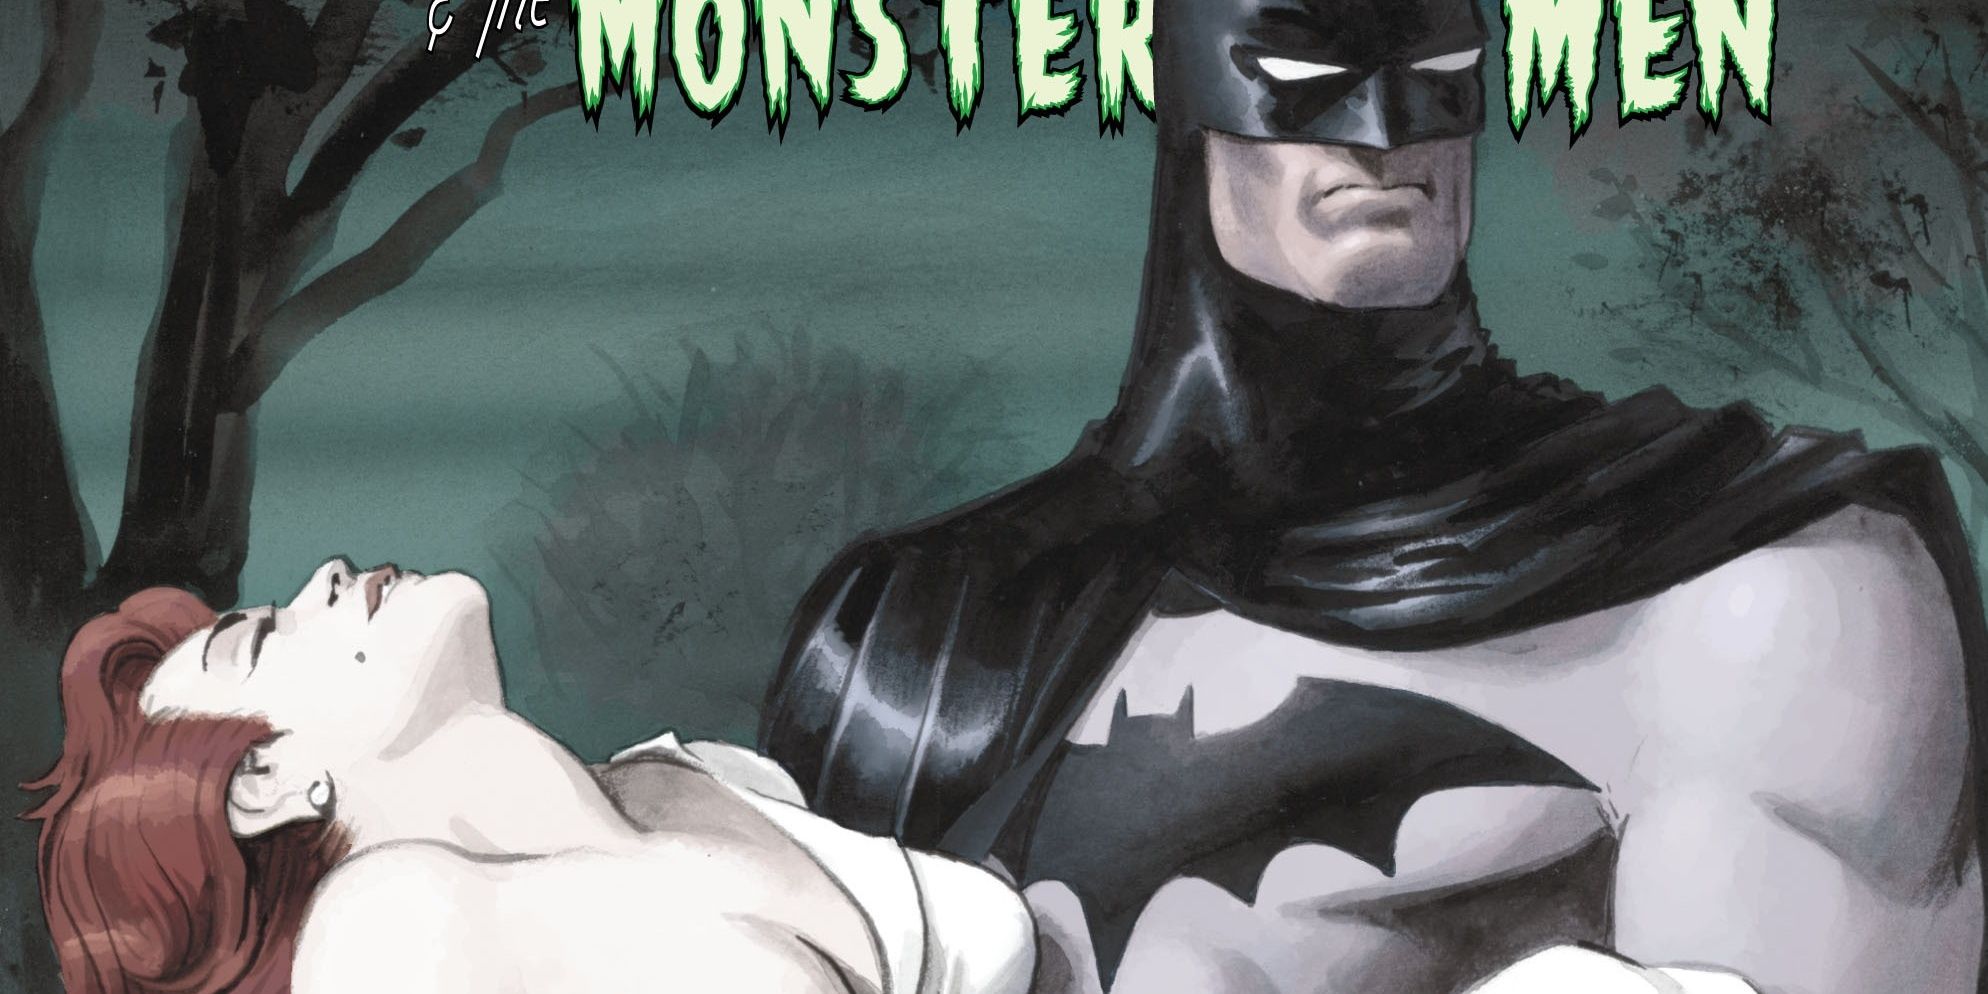 Batman carries Julie Madison on the cover of Batman and the Monster Men